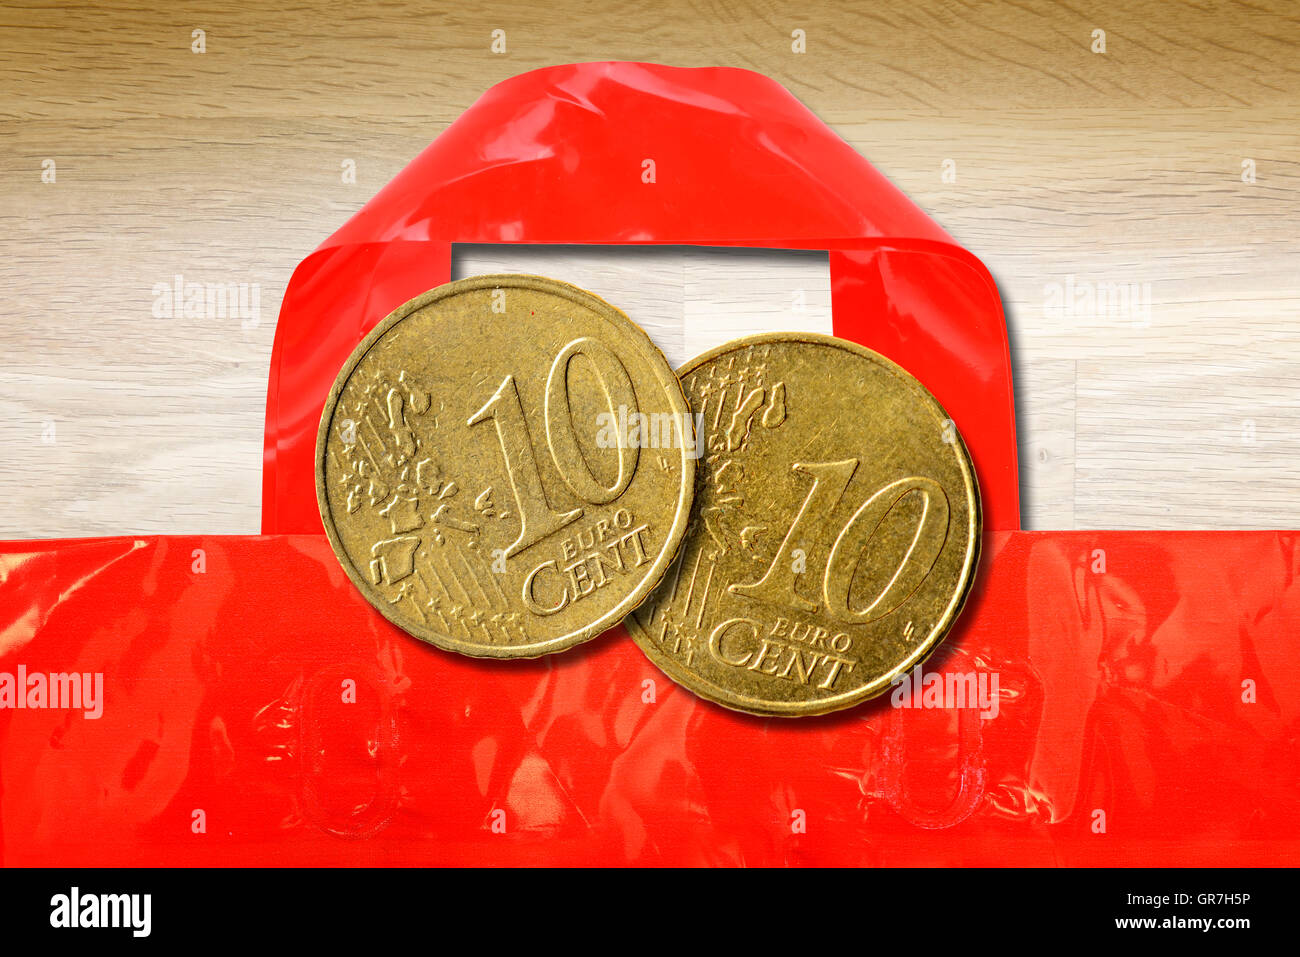 Plastic Coins High Resolution Stock Photography and Images - Alamy